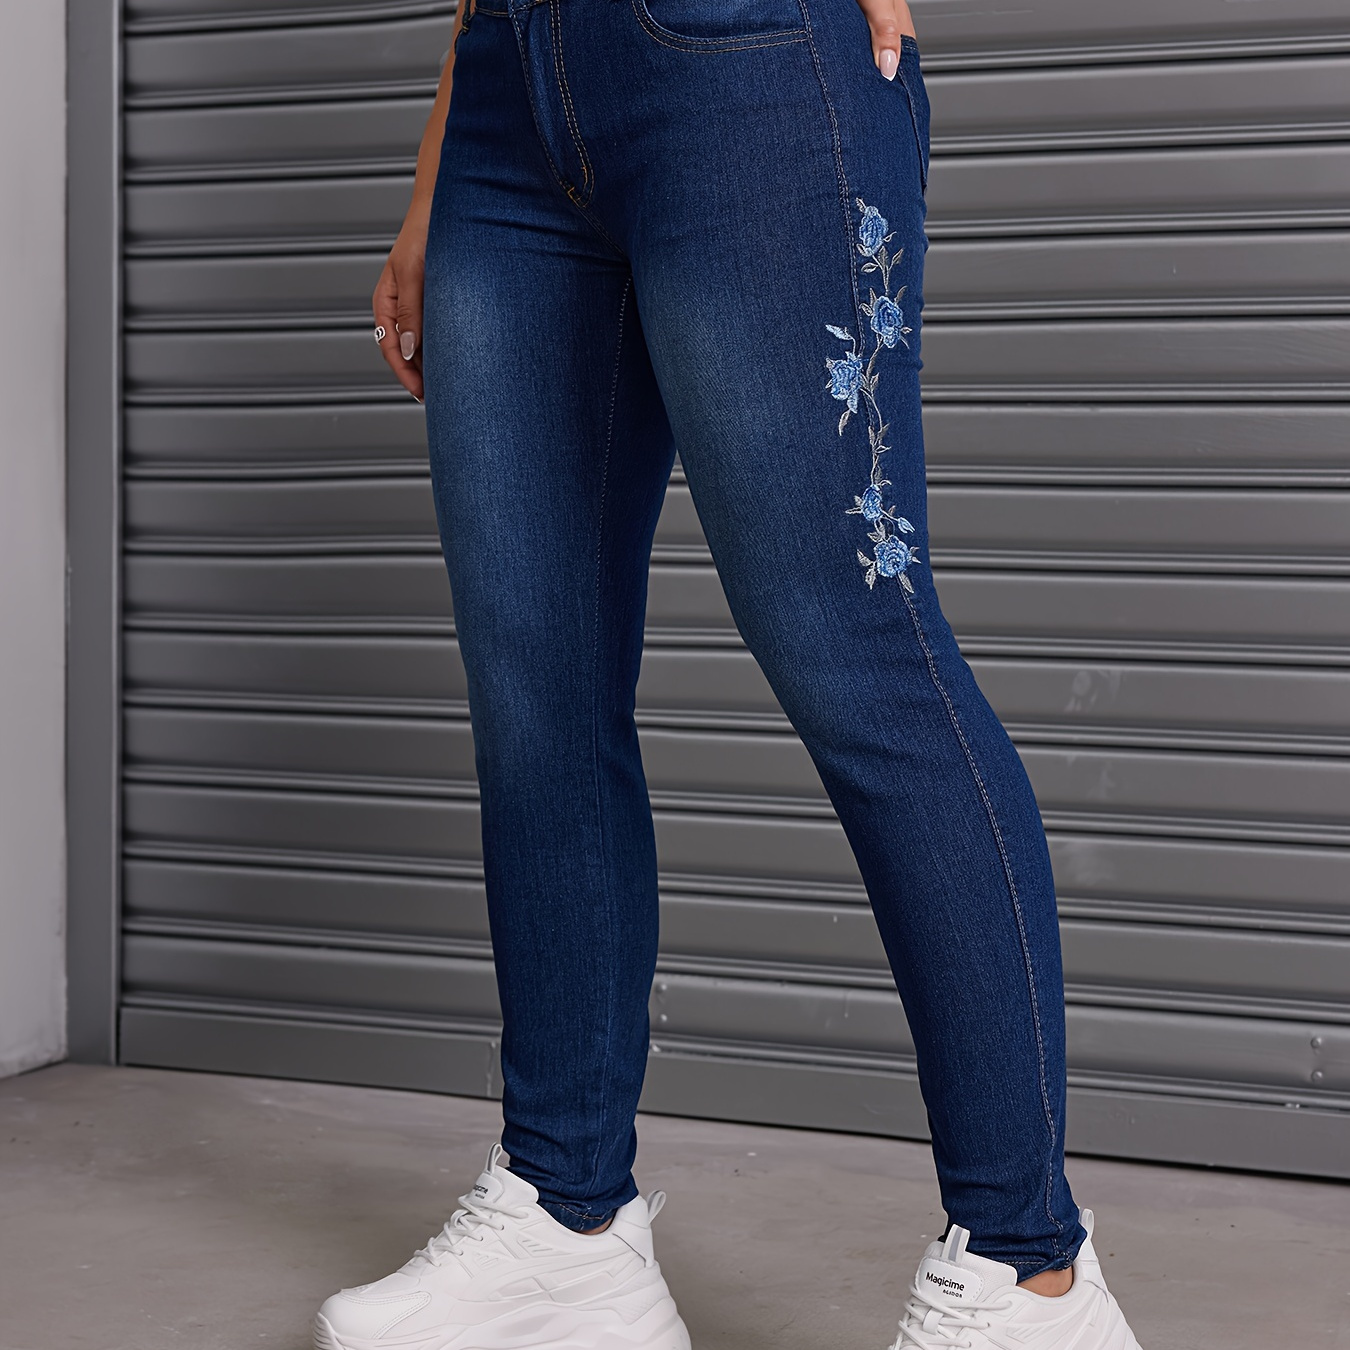 

Blue Floral Embroidery High Rise Stacked Skinny Jeans, Stretchy High Waist Tight Fit Denim Pants, Women's Denim Jeans & Clothing